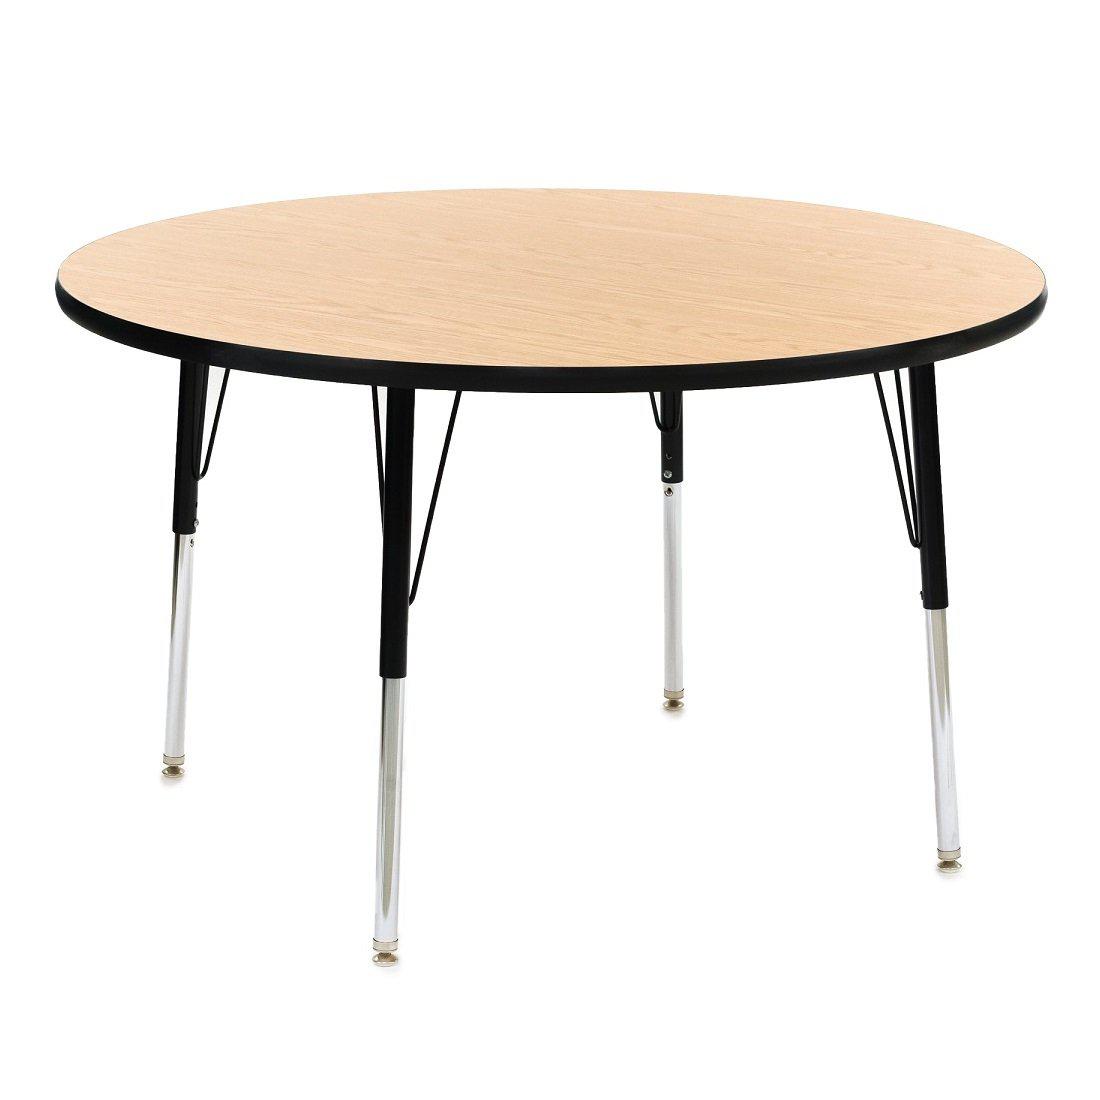 Workhorse Series Adjustable Height Activity Table with High-Pressure Laminate Top, 42" Round